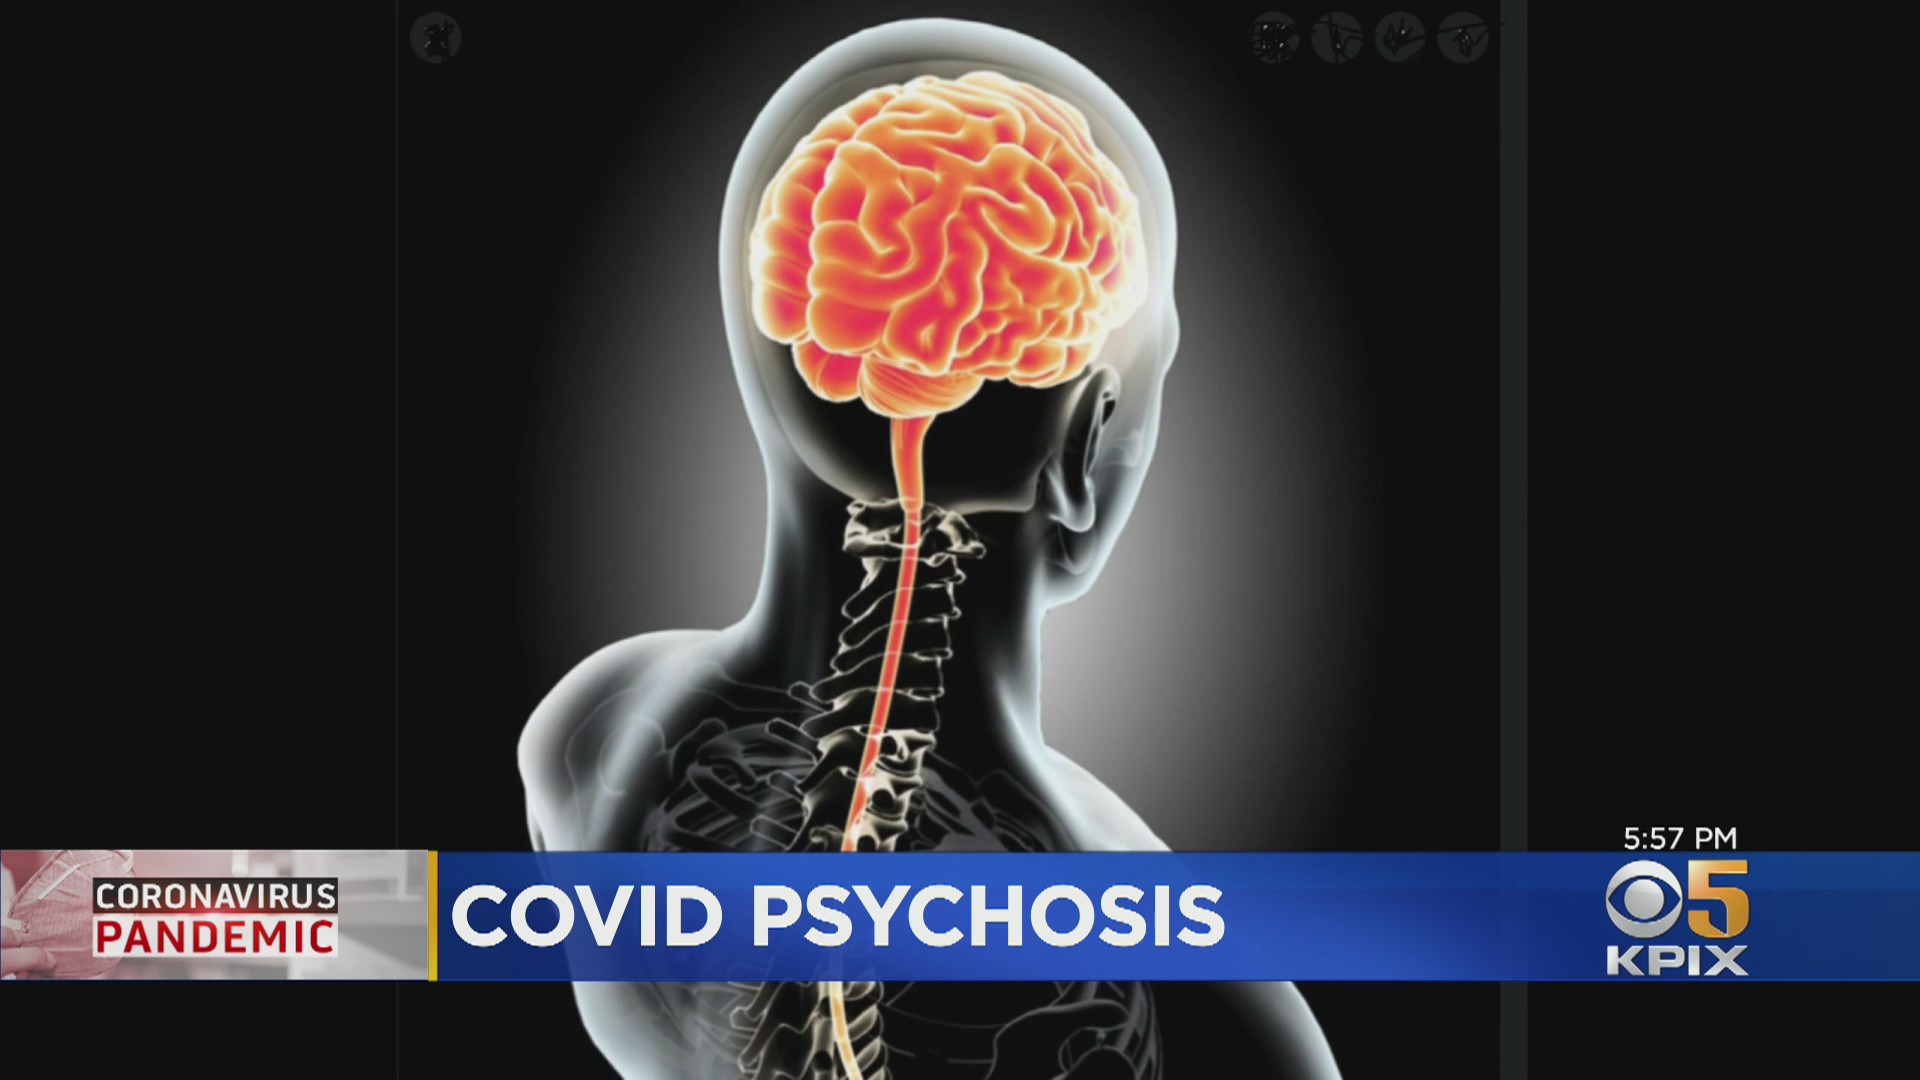 COVID: UCSF Researchers Examine Impact Of Coronavirus On Young Brains After 3 Teens Develop Psychosis - CBS San Francisco